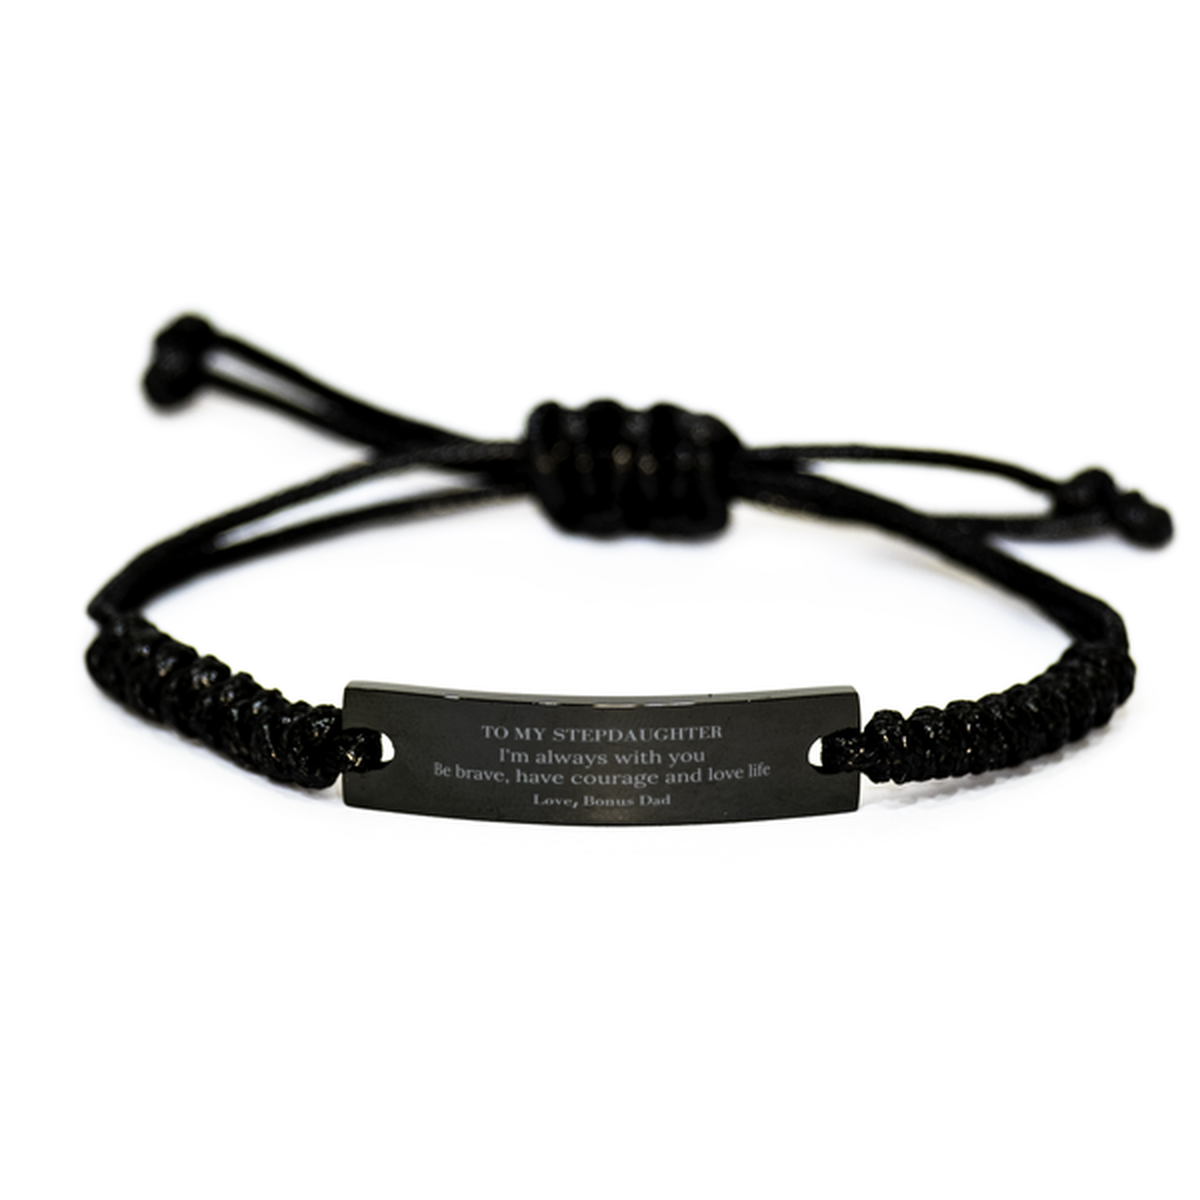 To My Stepdaughter Gifts from Bonus Dad, Unique Black Rope Bracelet Inspirational Christmas Birthday Graduation Gifts for Stepdaughter I'm always with you. Be brave, have courage and love life. Love, Bonus Dad